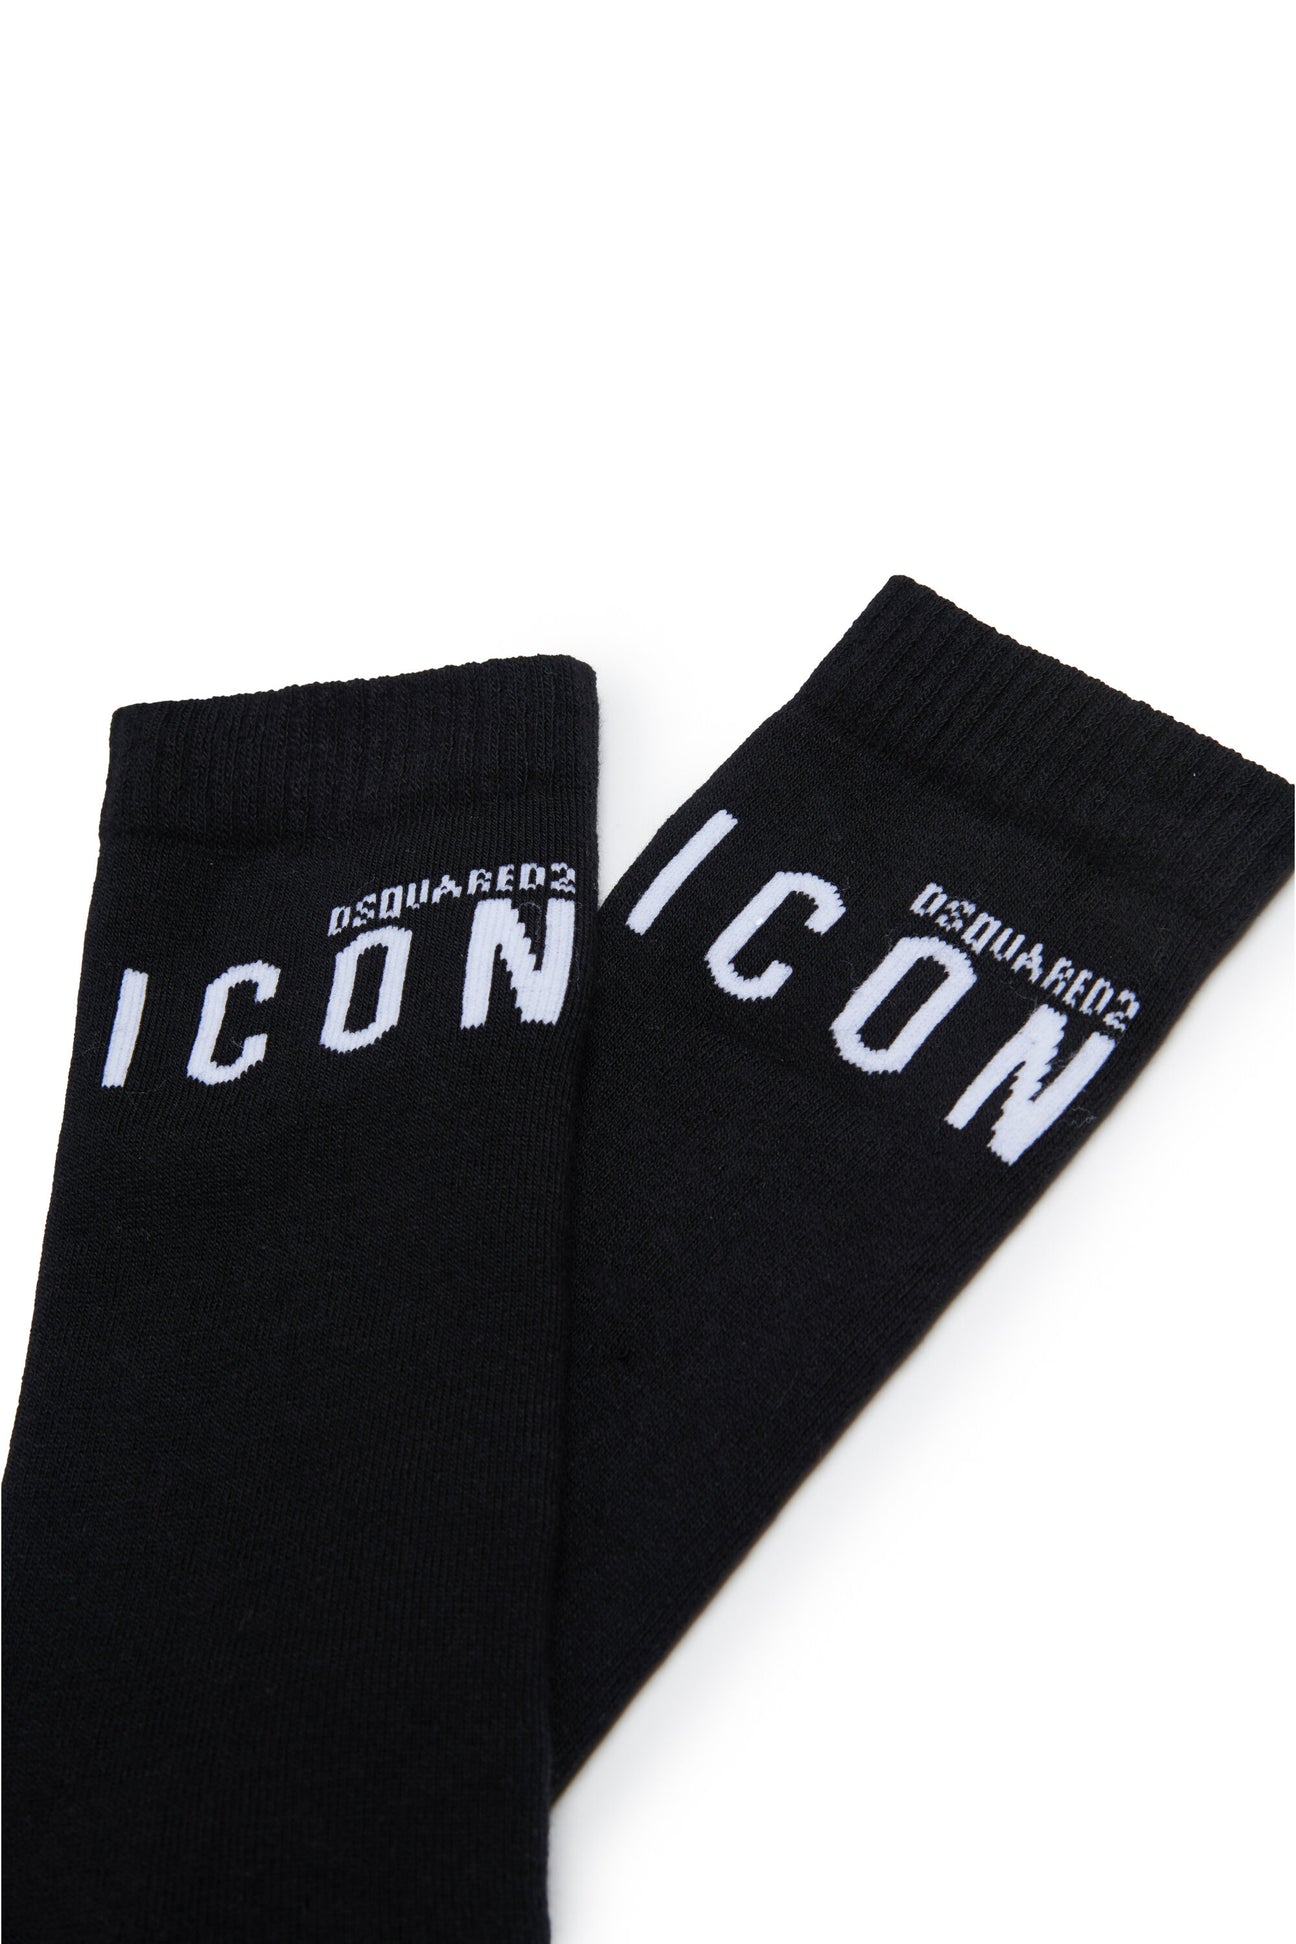 Cotton socks branded with ICON logo Cotton socks branded with ICON logo